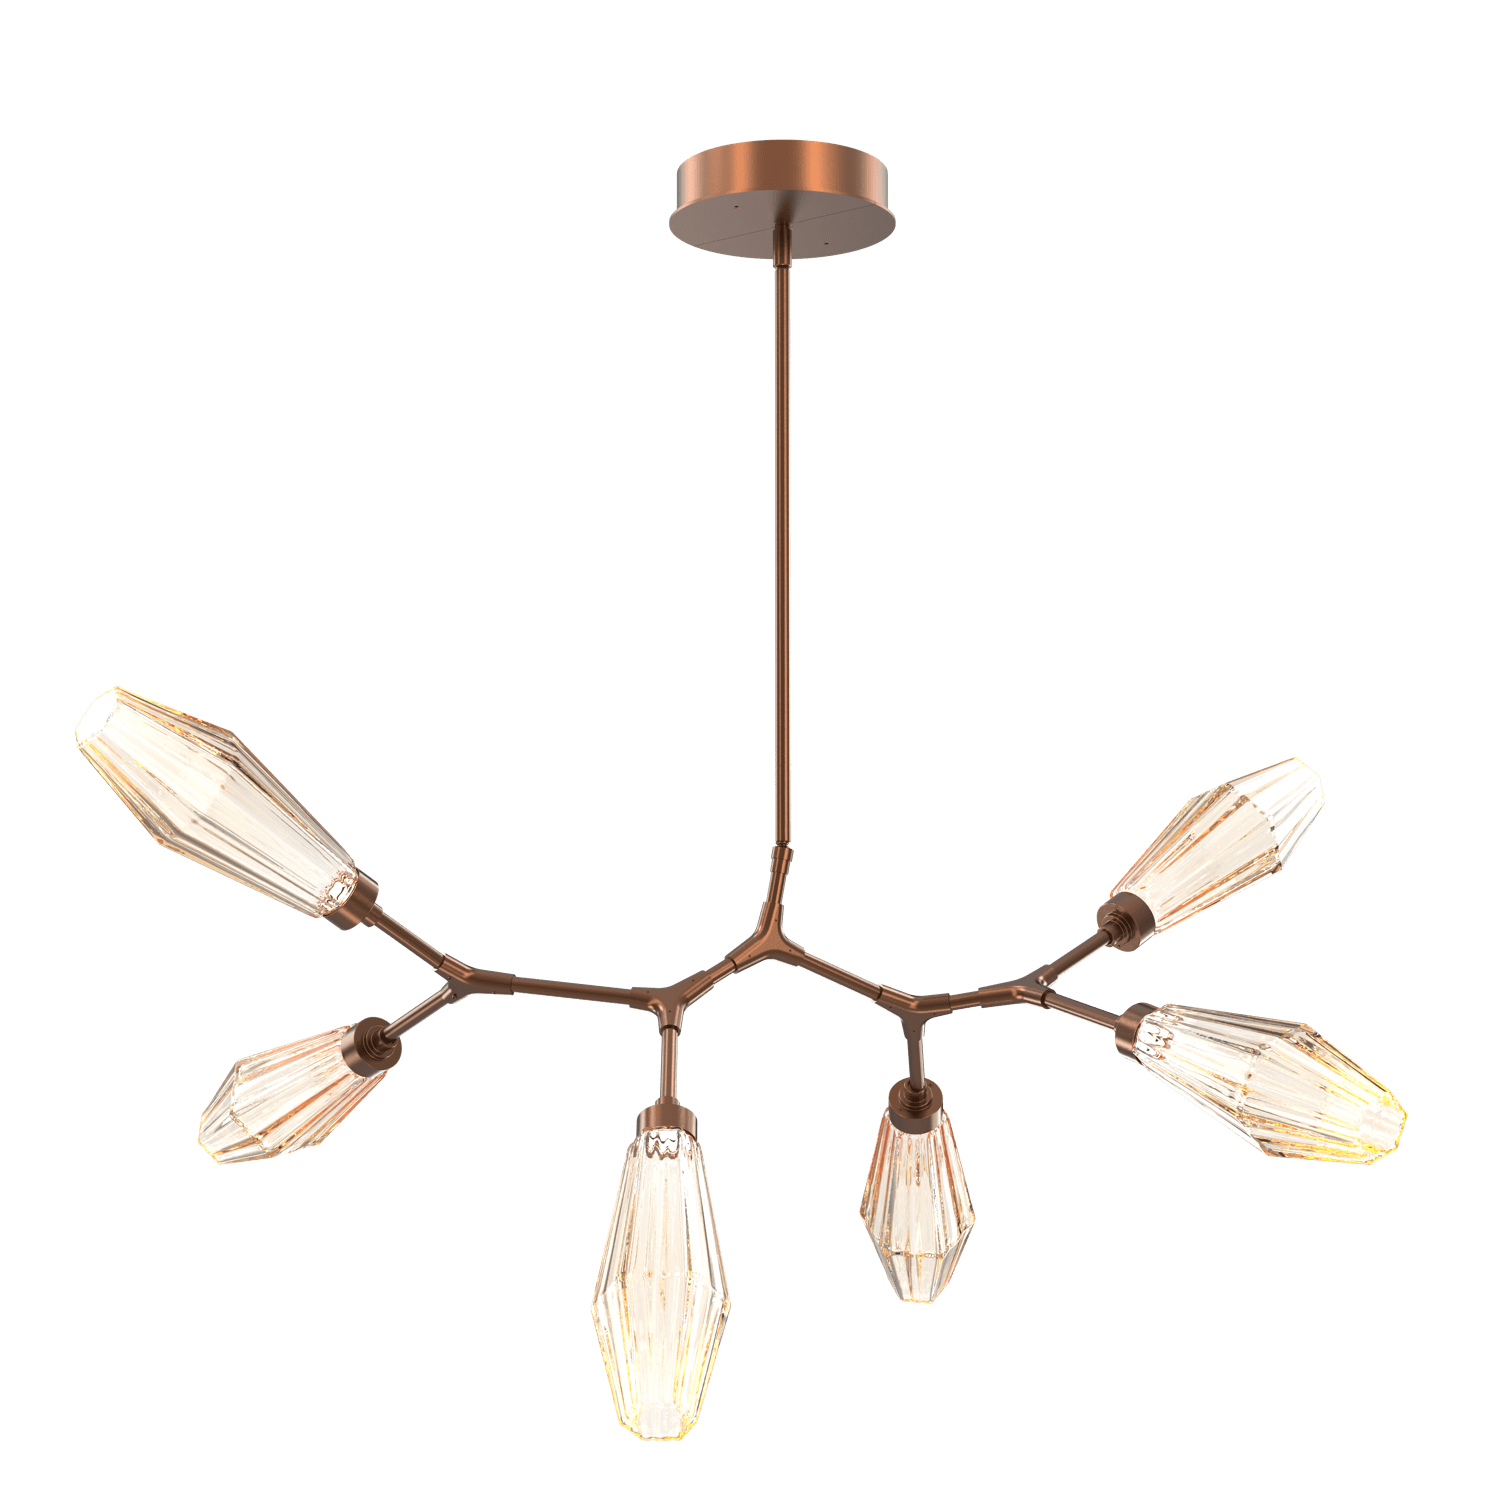 PLB0049-BA-BB-RA-Hammerton-Studio-Aalto-6-light-modern-branch-chandelier-with-burnished-bronze-finish-and-optic-ribbed-amber-glass-shades-and-LED-lamping